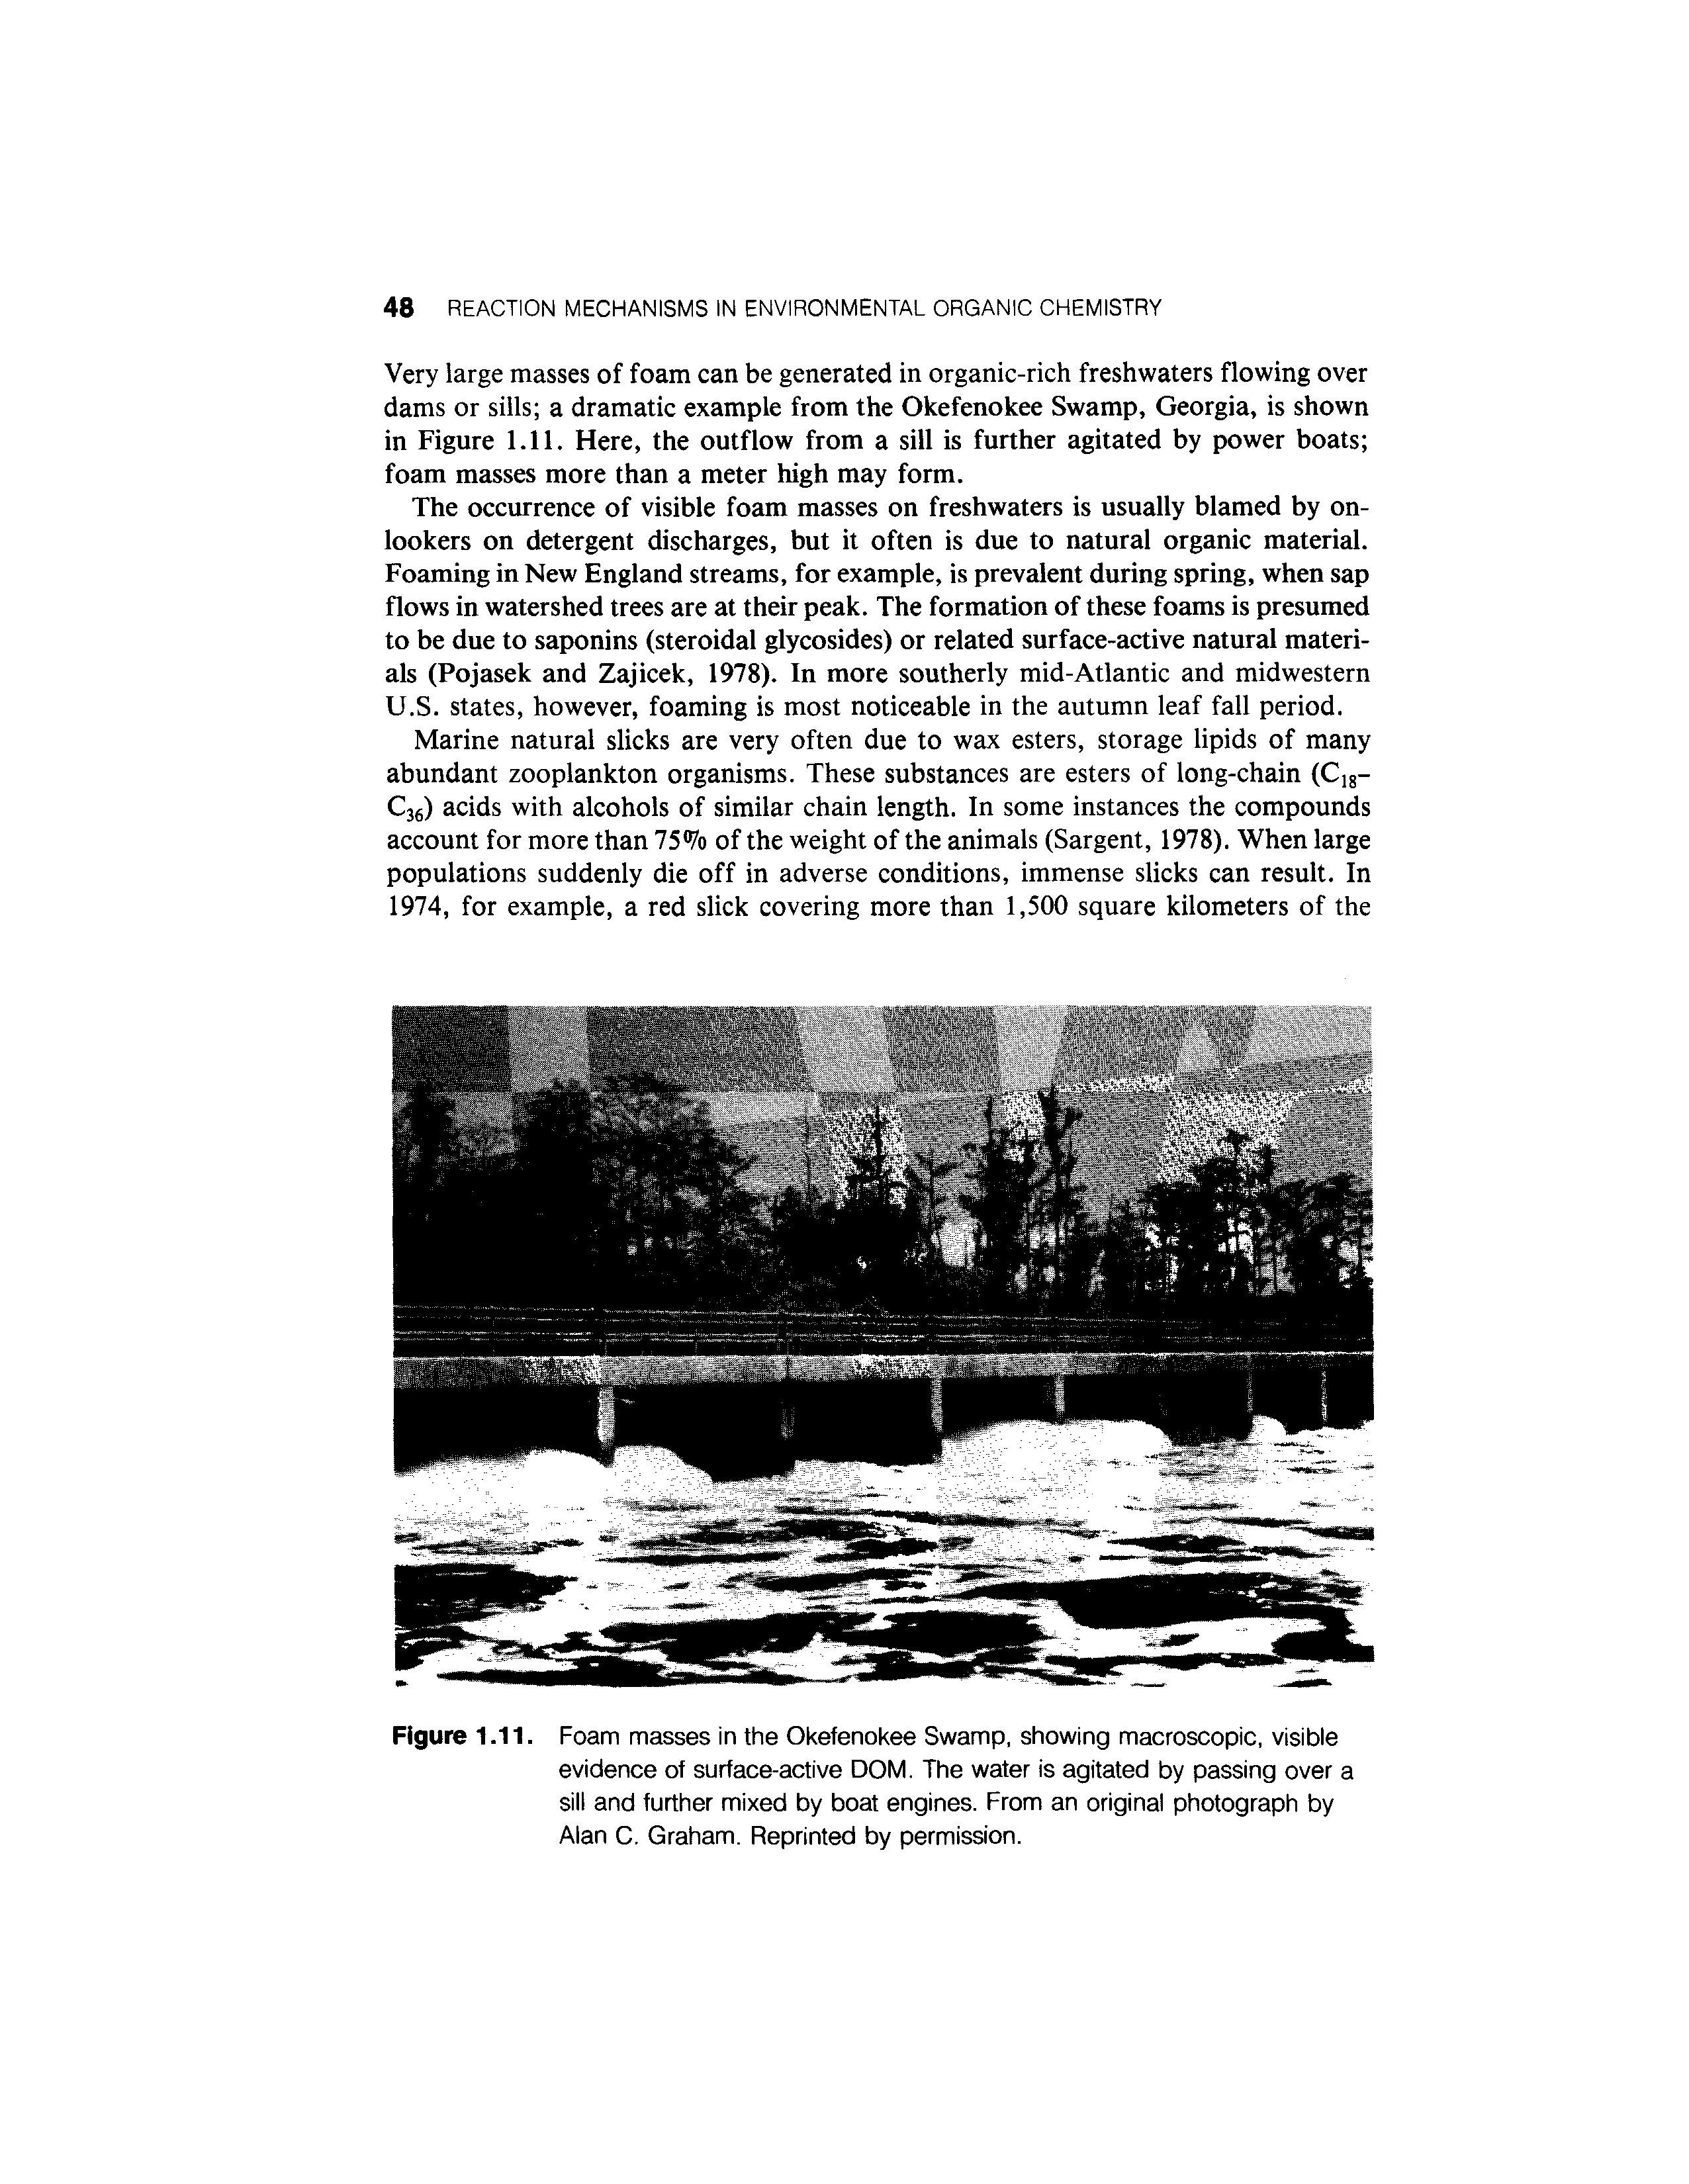 Figure 1.11. Foam masses in the Okefenokee Swamp, showing macroscopic, visible evidence of surface-active DOM. The water is agitated by passing over a sill and further mixed by boat engines. From an original photograph by Alan C, Graham. Reprinted by permission.